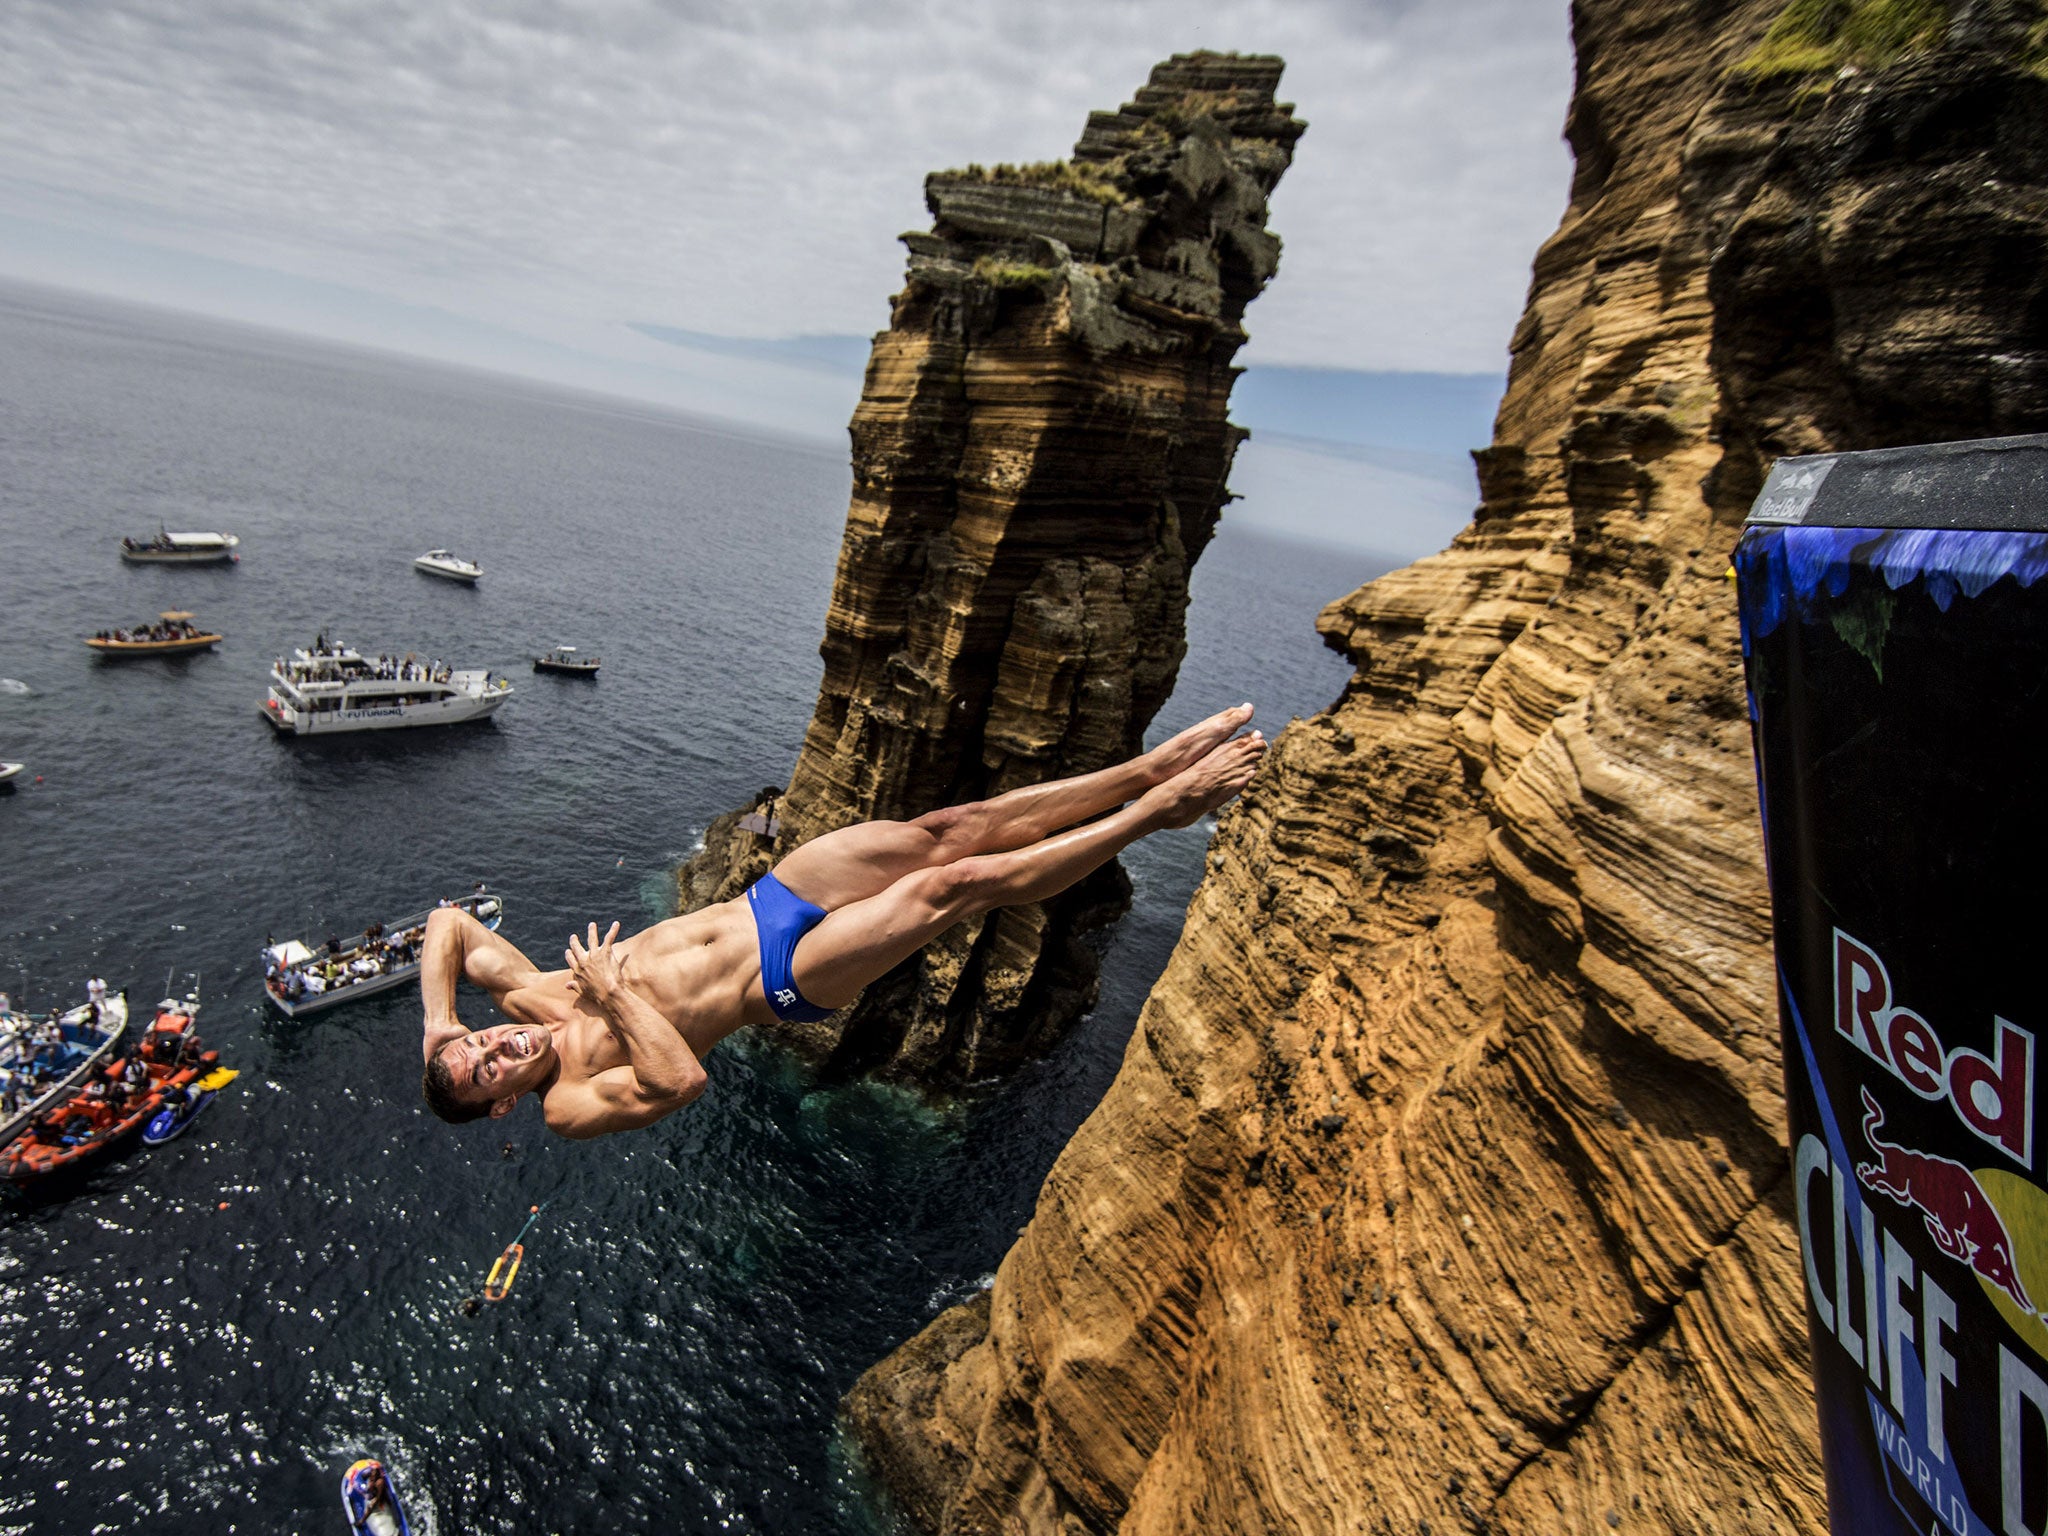 Red Bull’s Cliff Diving World Series The competition’s on a cliff edge